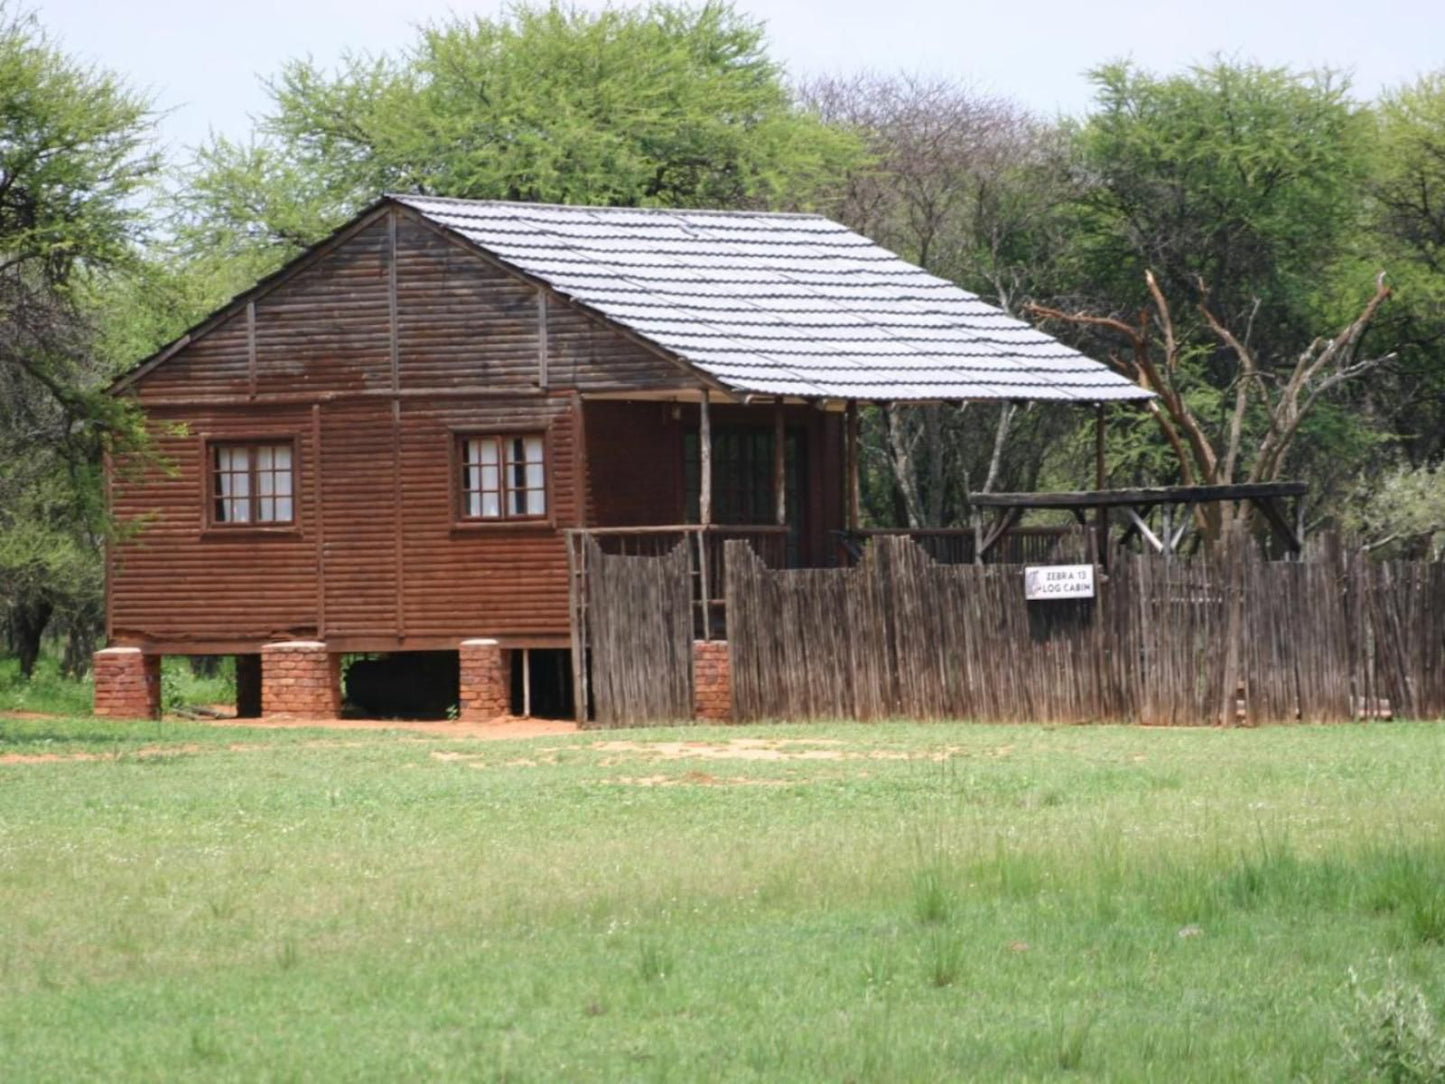 Grootgeluk Bush Camp Mookgopong Naboomspruit Limpopo Province South Africa Building, Architecture, House